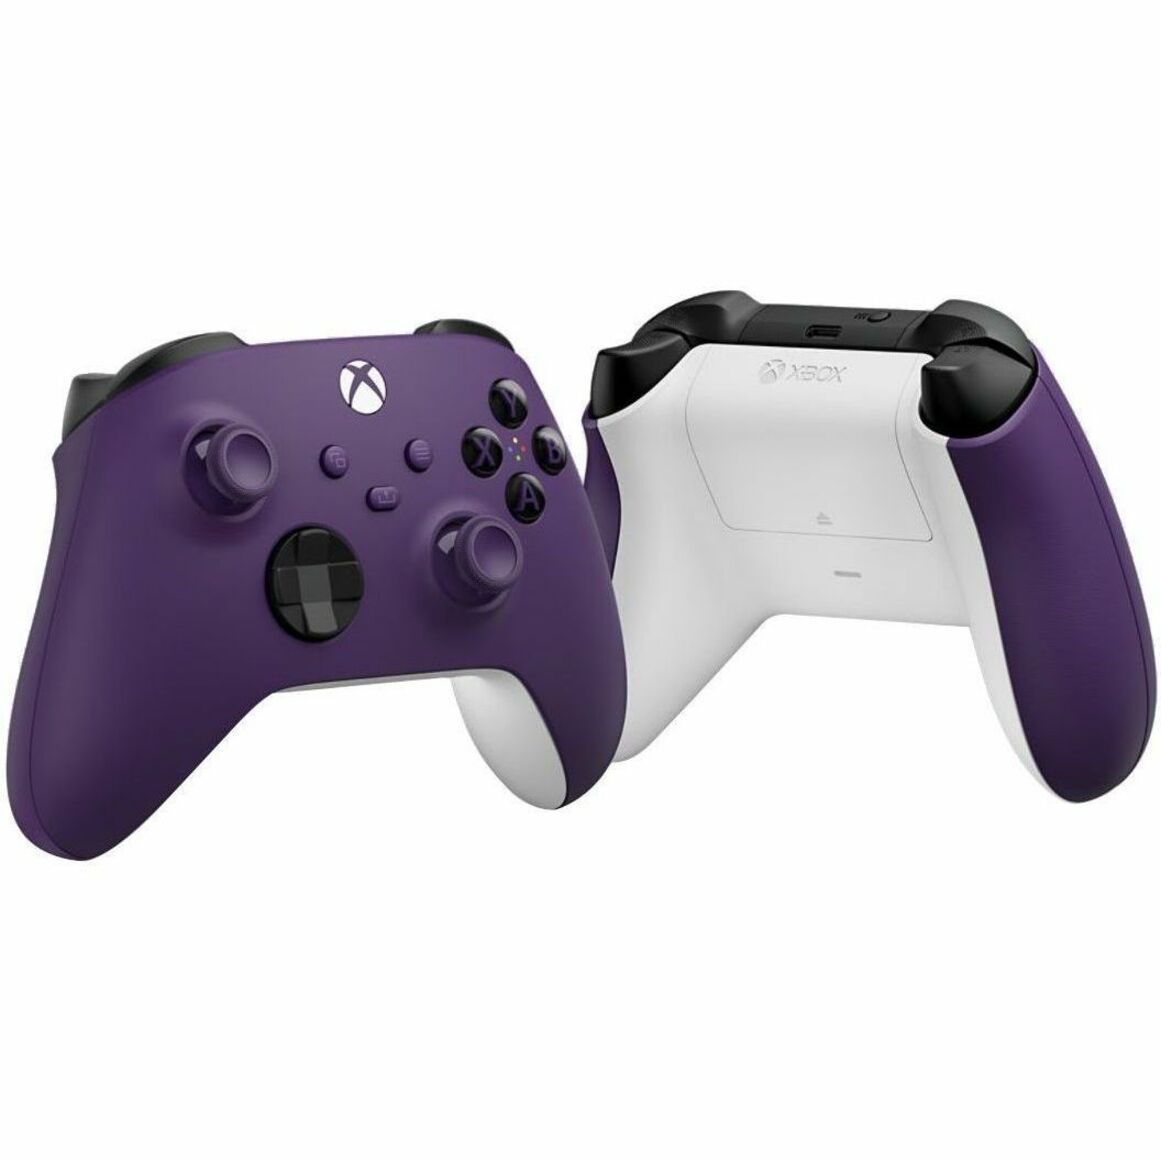 Microsoft QAU-00068 Xbox Wireless Controller, Astral Purple, Textured Triggers And Bumpers, Hybrid D-Pad, Dedicated Share Button